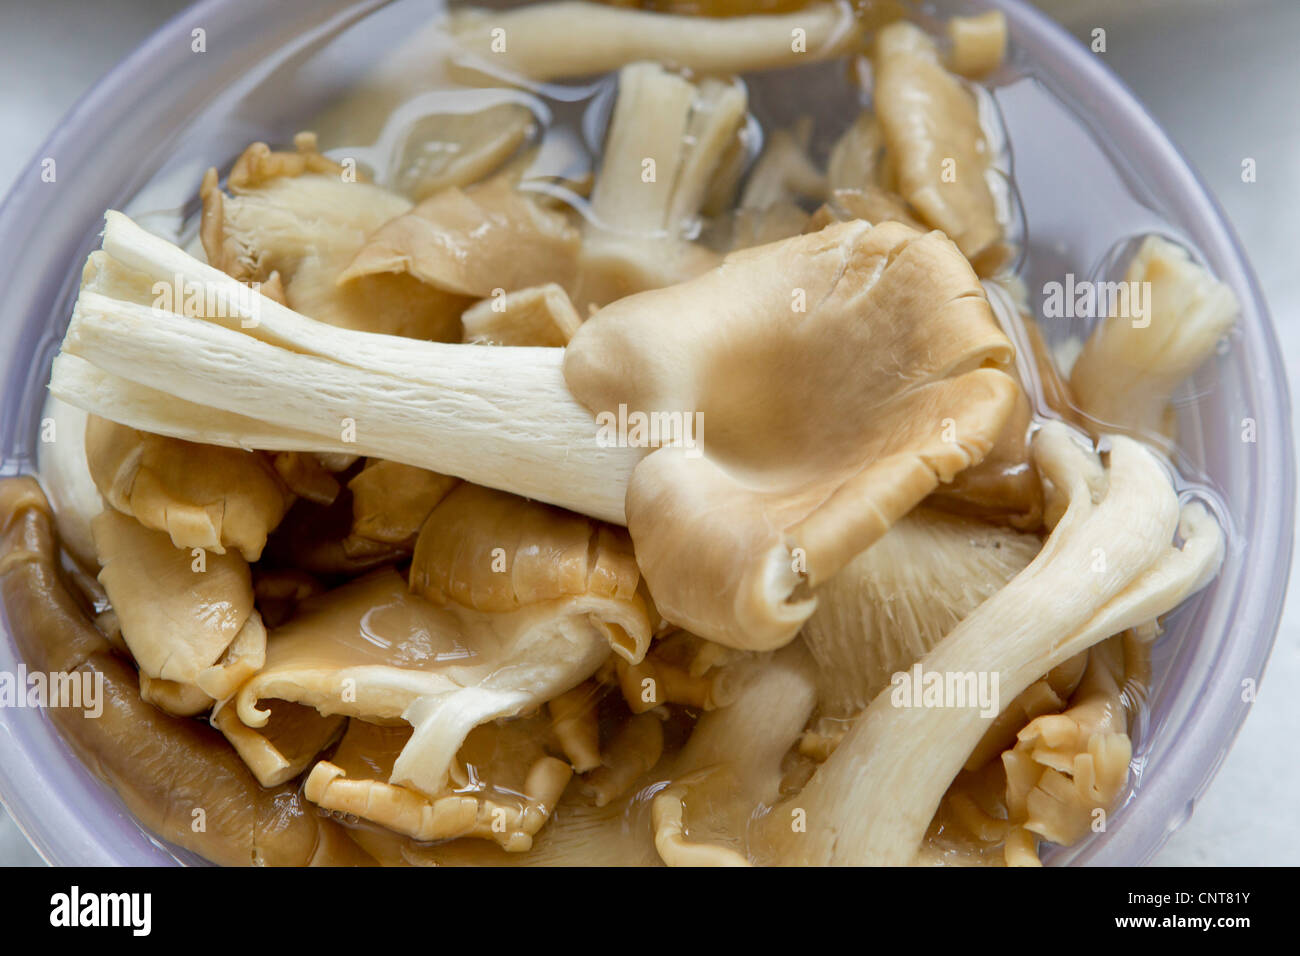 Oyster mushrooms in bowl of water Stock Photo